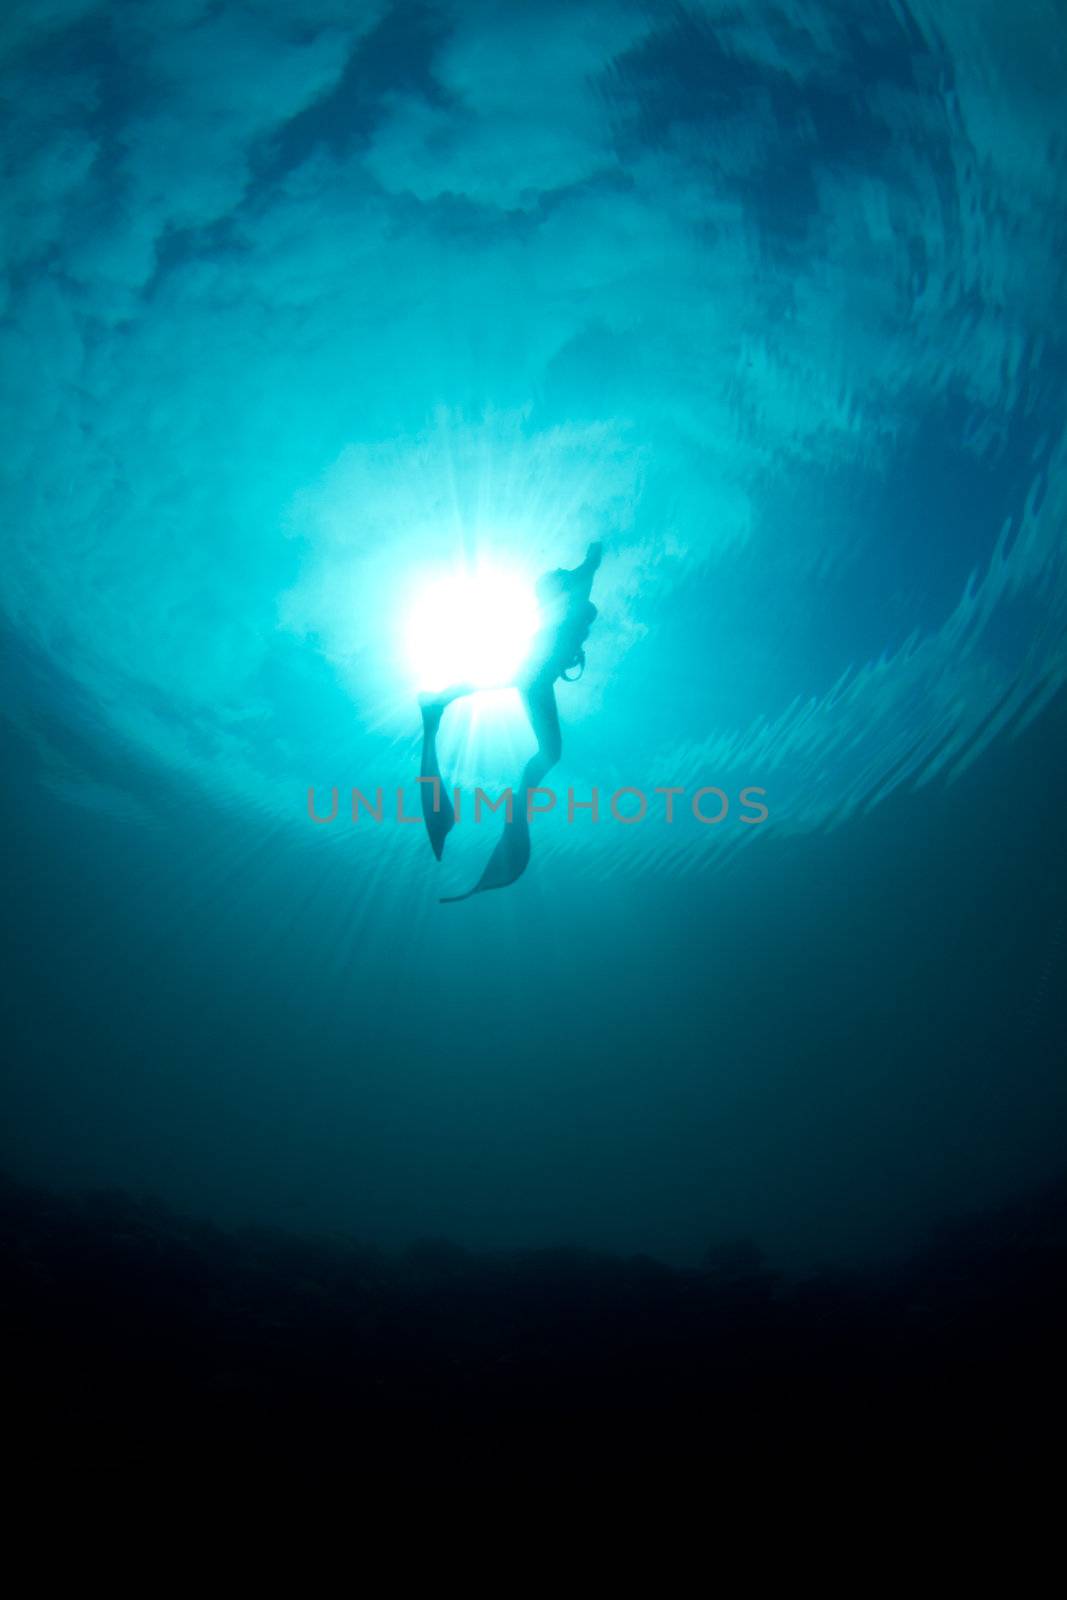 A young woman ascends from a free dive against the sun